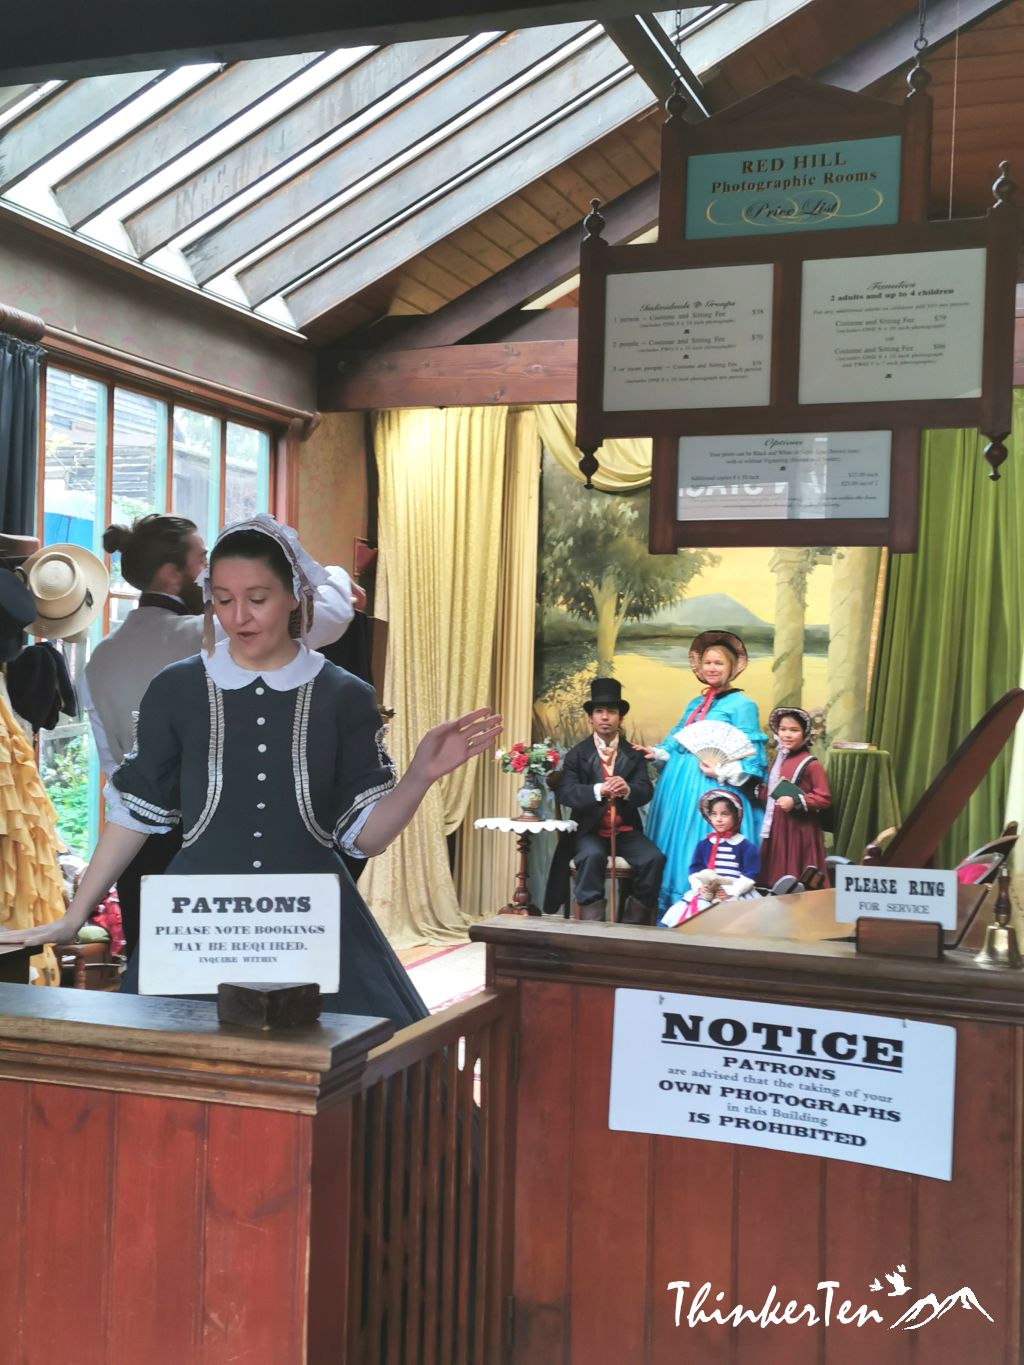 Stepping Back in Time in Sovereign Hill, Melbourne Australia